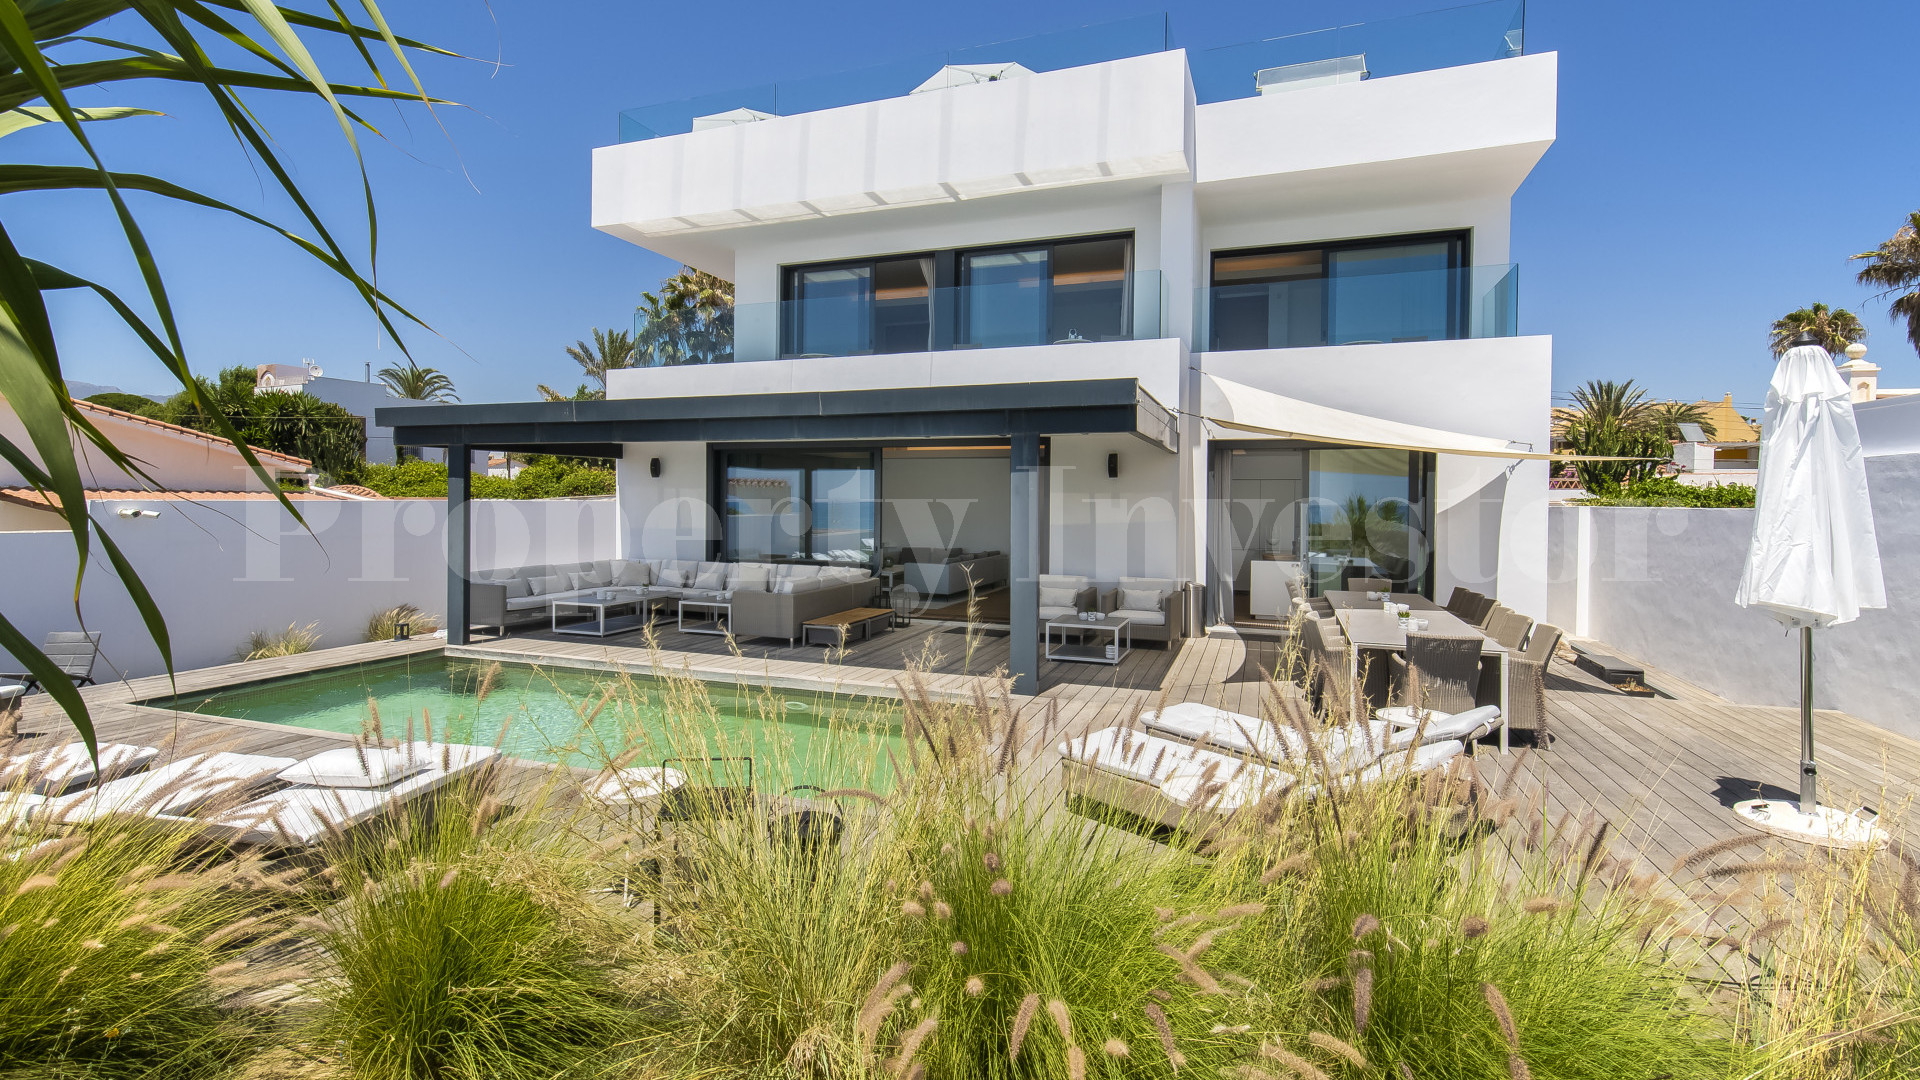 Incredible 6 Bedroom Luxury Beachfront Villa with Fantastic Rooftop Entertaining Areas & Private Beach Access for Sale in Marbella, Spain